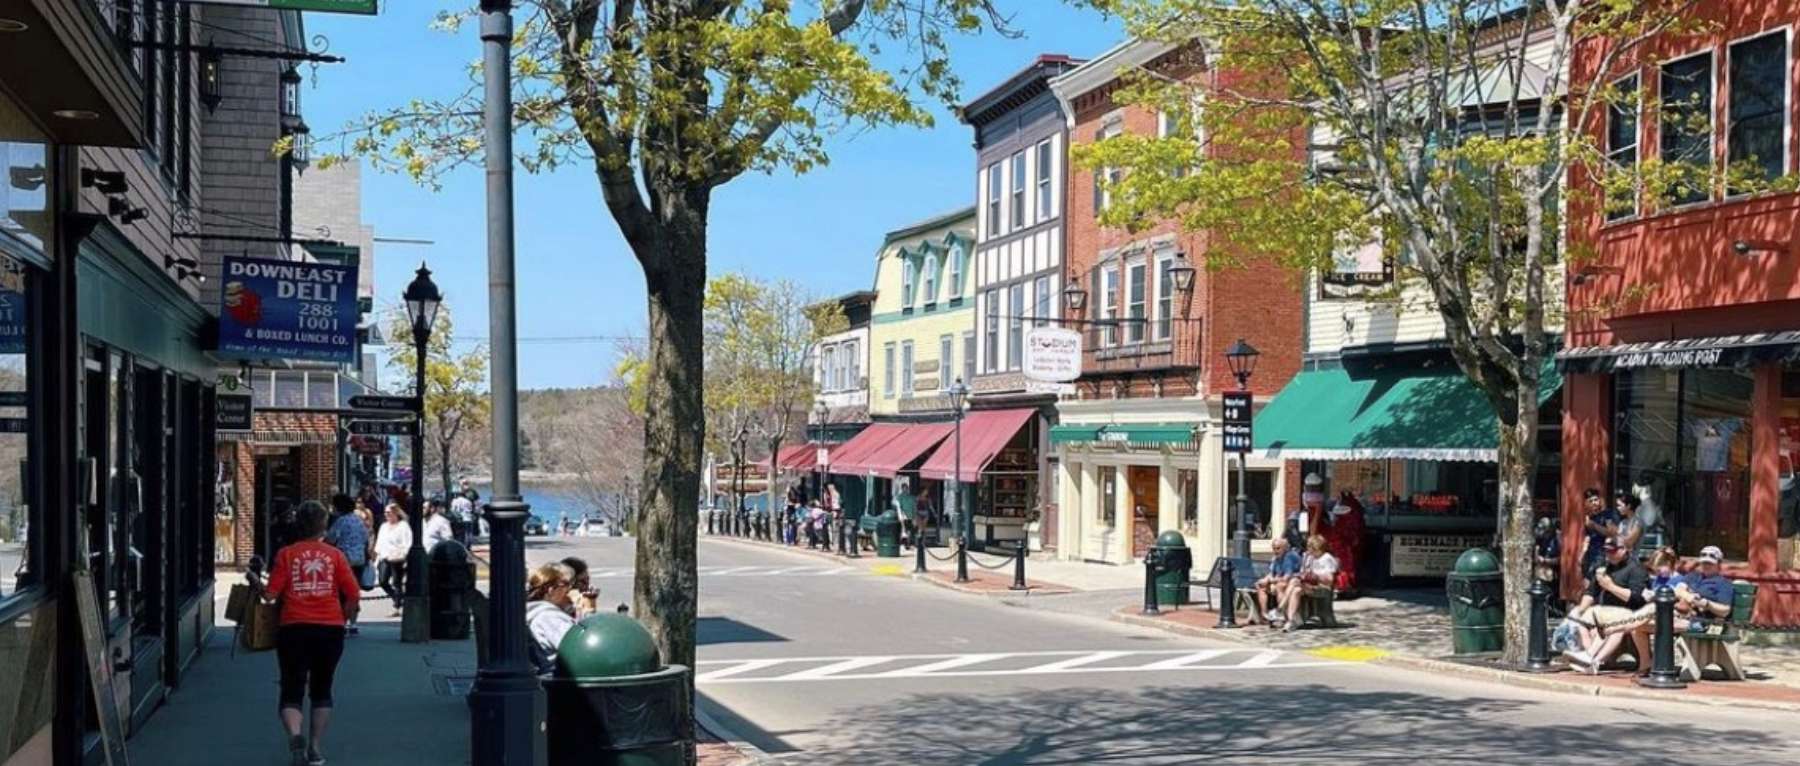 Spring Shopping in Bar Harbor, ME - Photo Credit Bar Harbor Chamber of Commerce